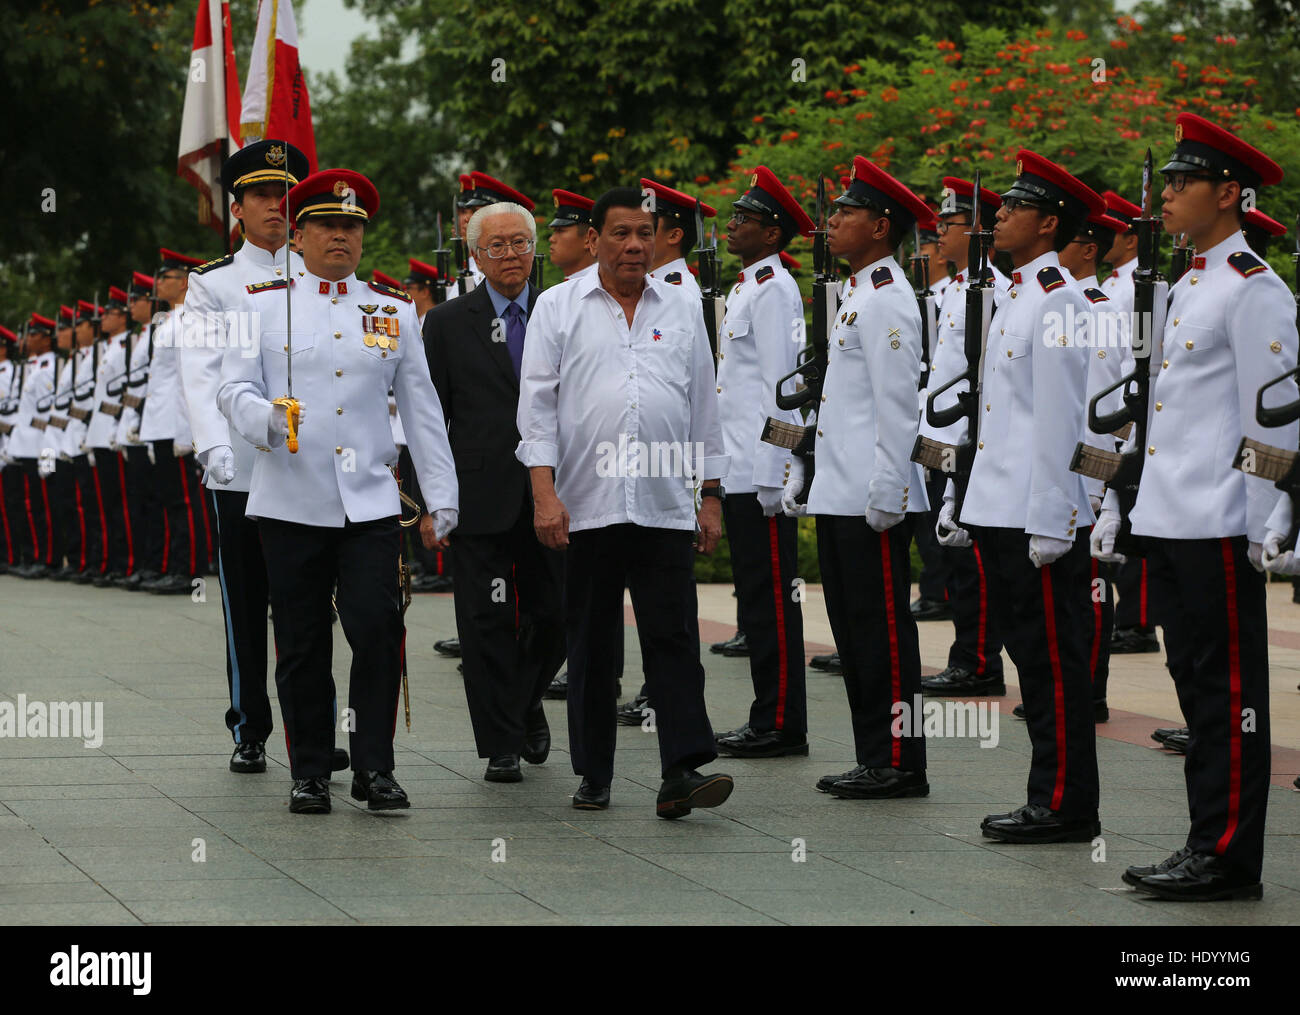 (161215) -- SINGAPORE, Dec. 15, 2016 (Xinhua) -- Philippine President Rodrigo Duterte (4th L) and Singapore's President Tony Tan Keng Yam (3rd L) attend the official welcome ceremony at Singapore's Istana, Dec. 15, 2016. Philippine President Rodrigo Duterte began his two-day state visit to Singapore on Thursday. (Xinhua/Bao Xuelin) (cl) Stock Photo